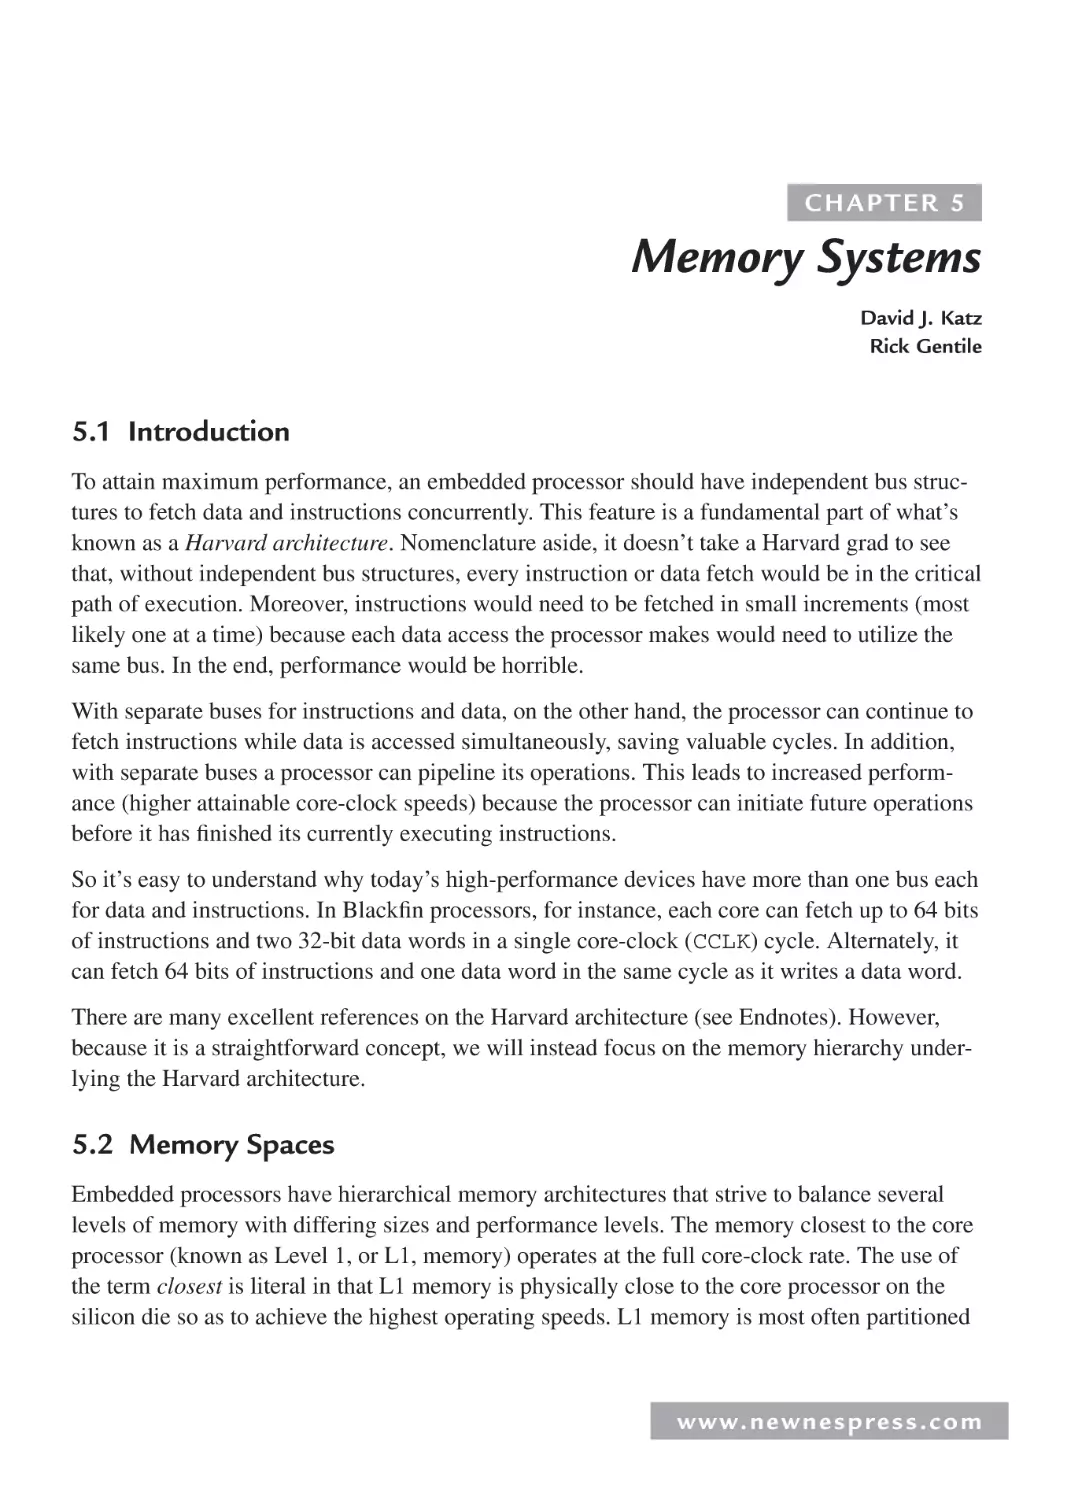 5 Memory Systems
5.1 Introduction
5.2 Memory Spaces